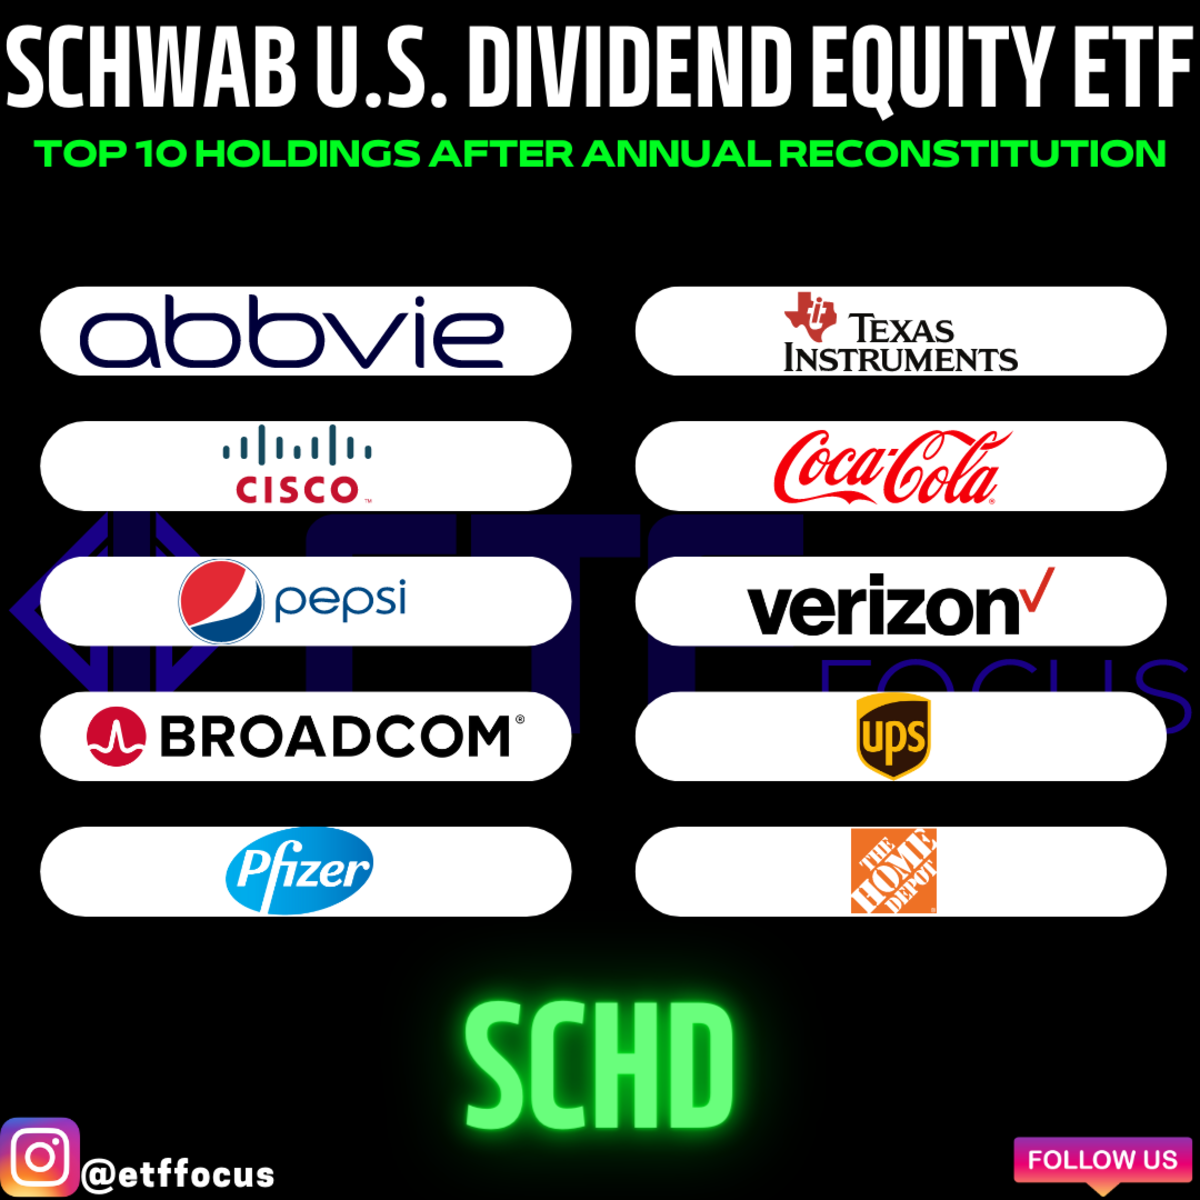 Schwab US Dividend Equity ETF (SCHD) New Top 10 Holdings ABBV, PFE